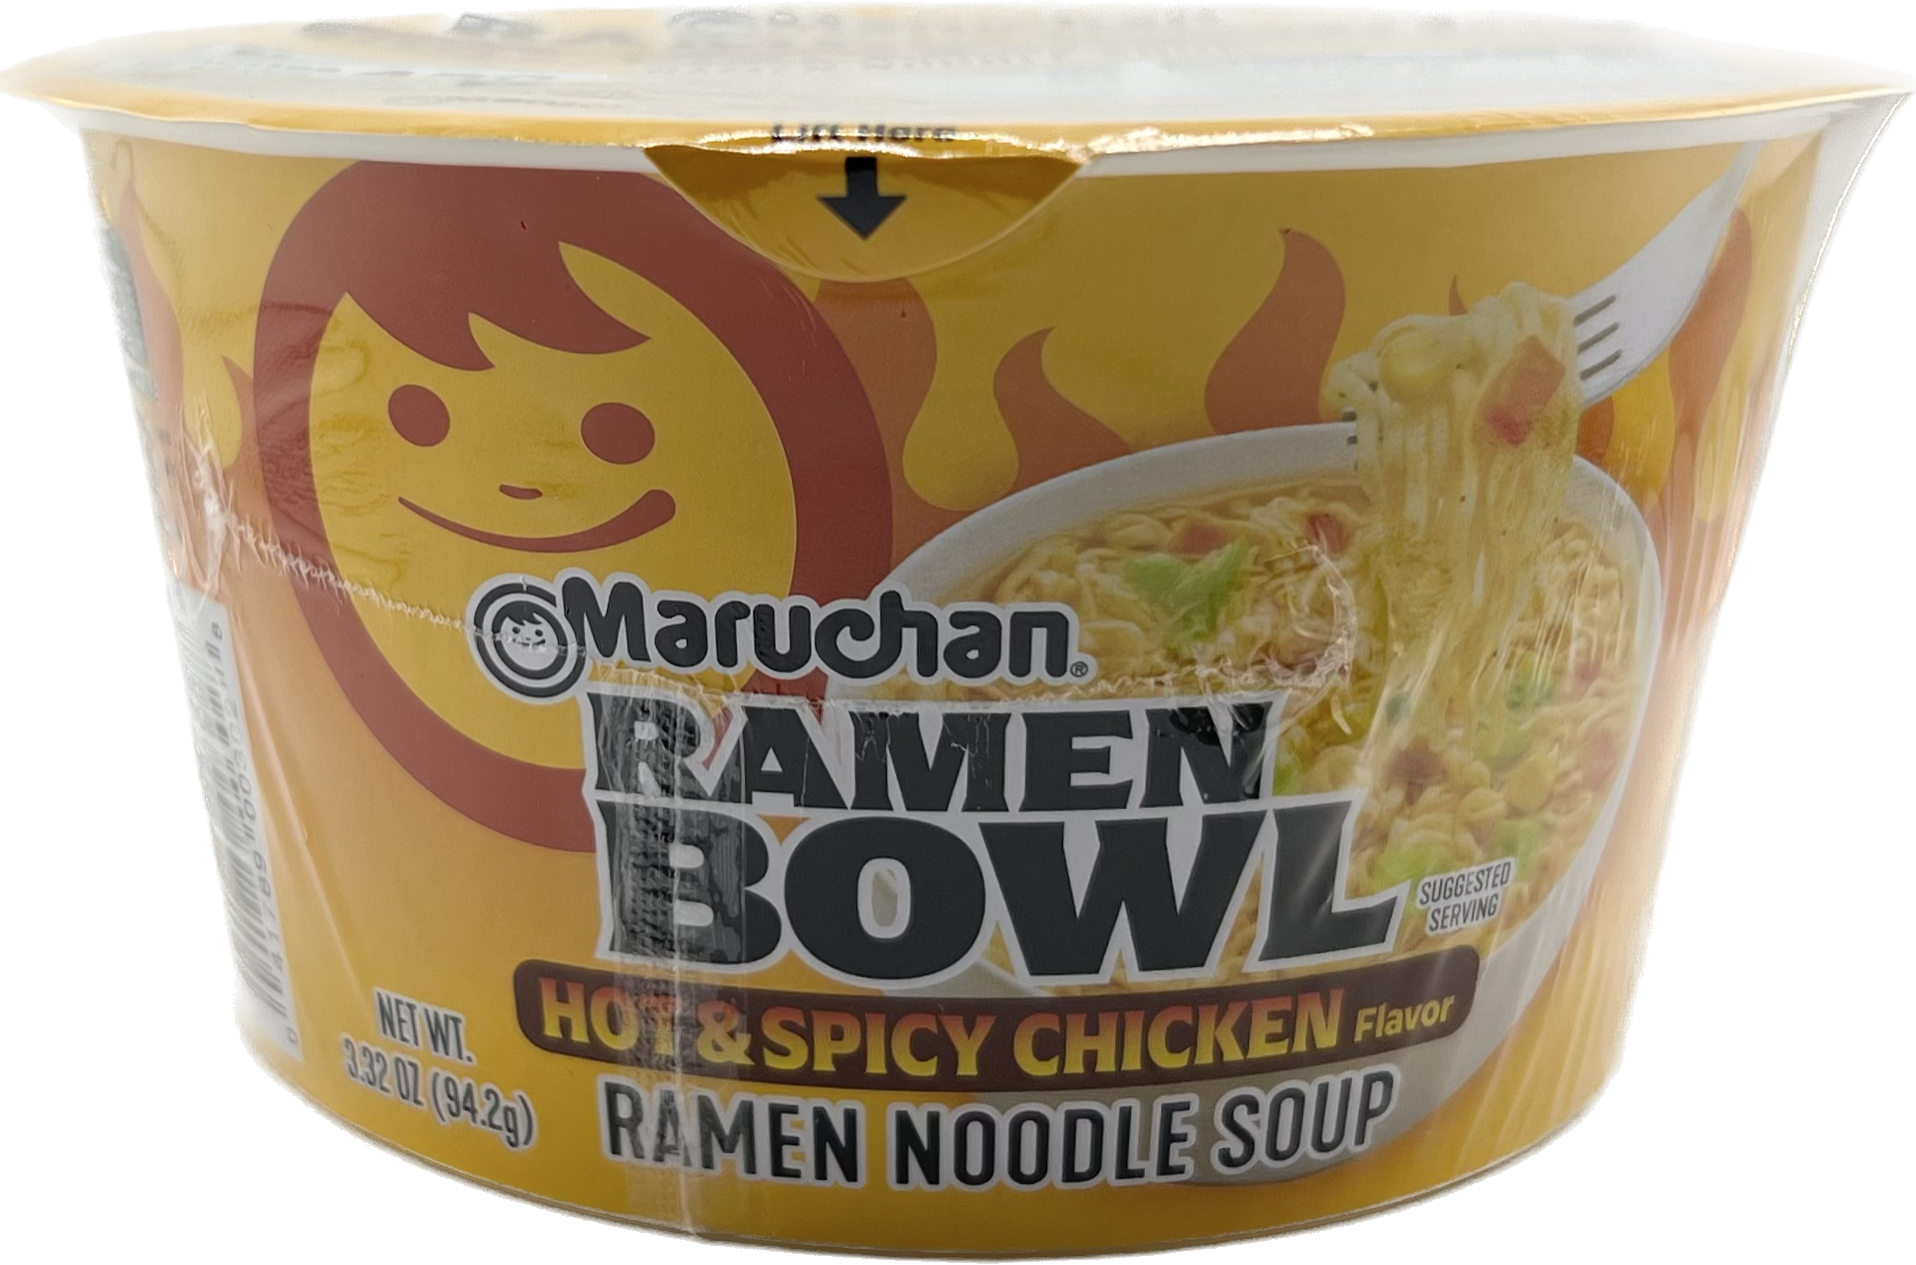 Maruchan Ramen Variety 4 flavors, Pack of 12 + By The Cup Microwavable